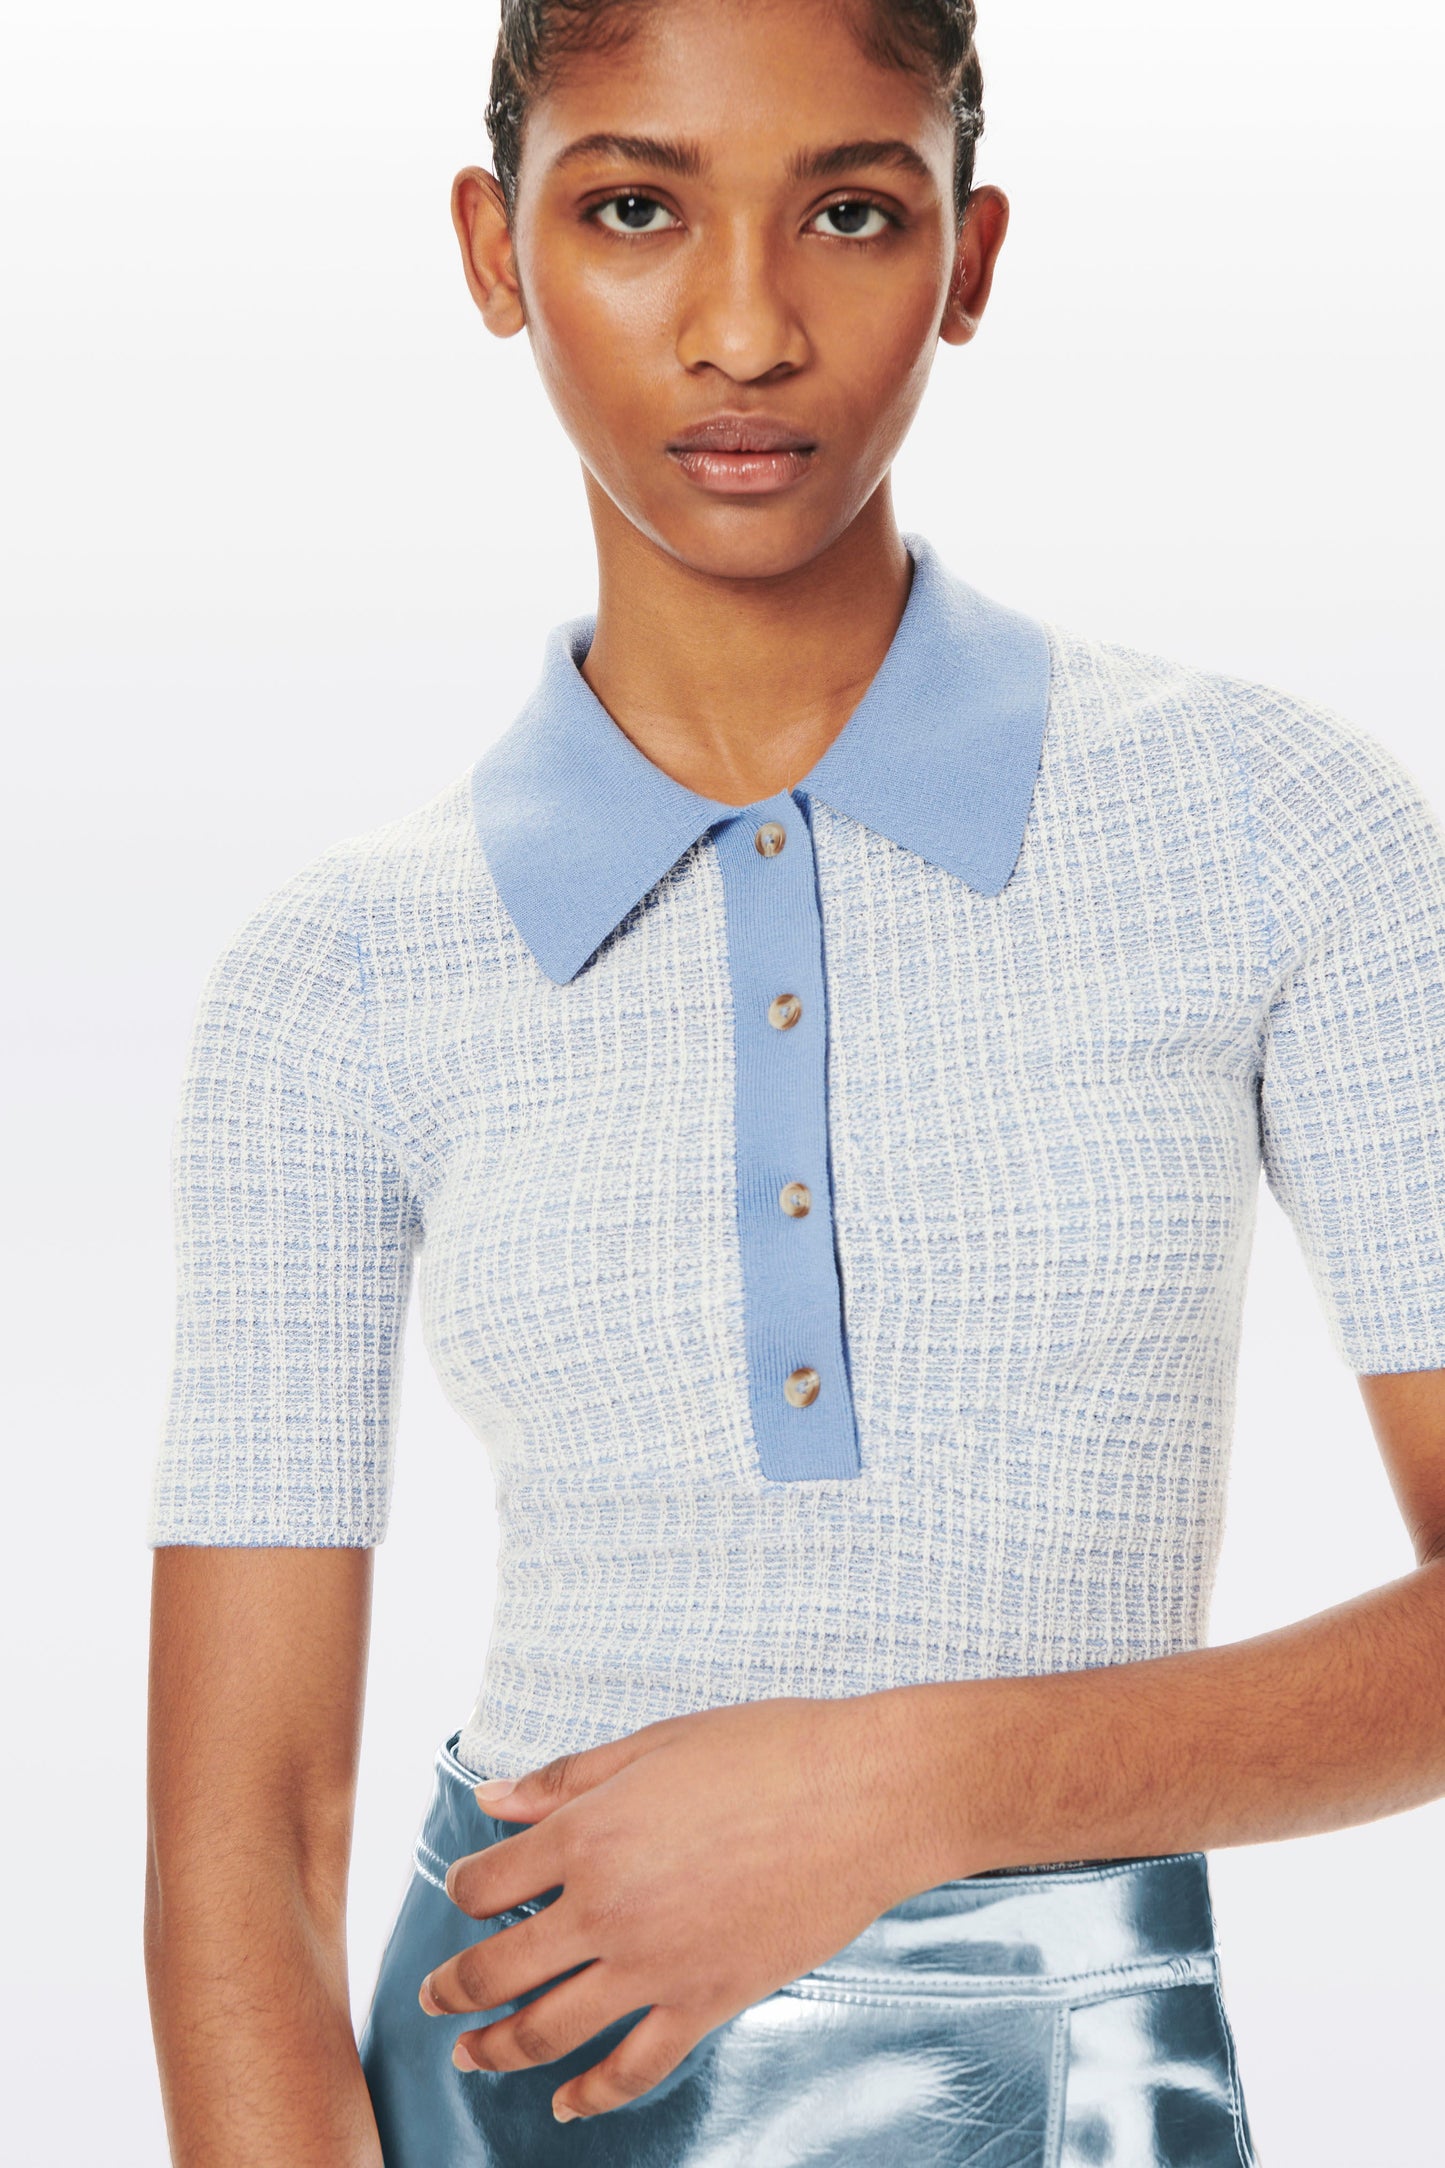 Jacquard Polo Top in Cornflower Blue and White